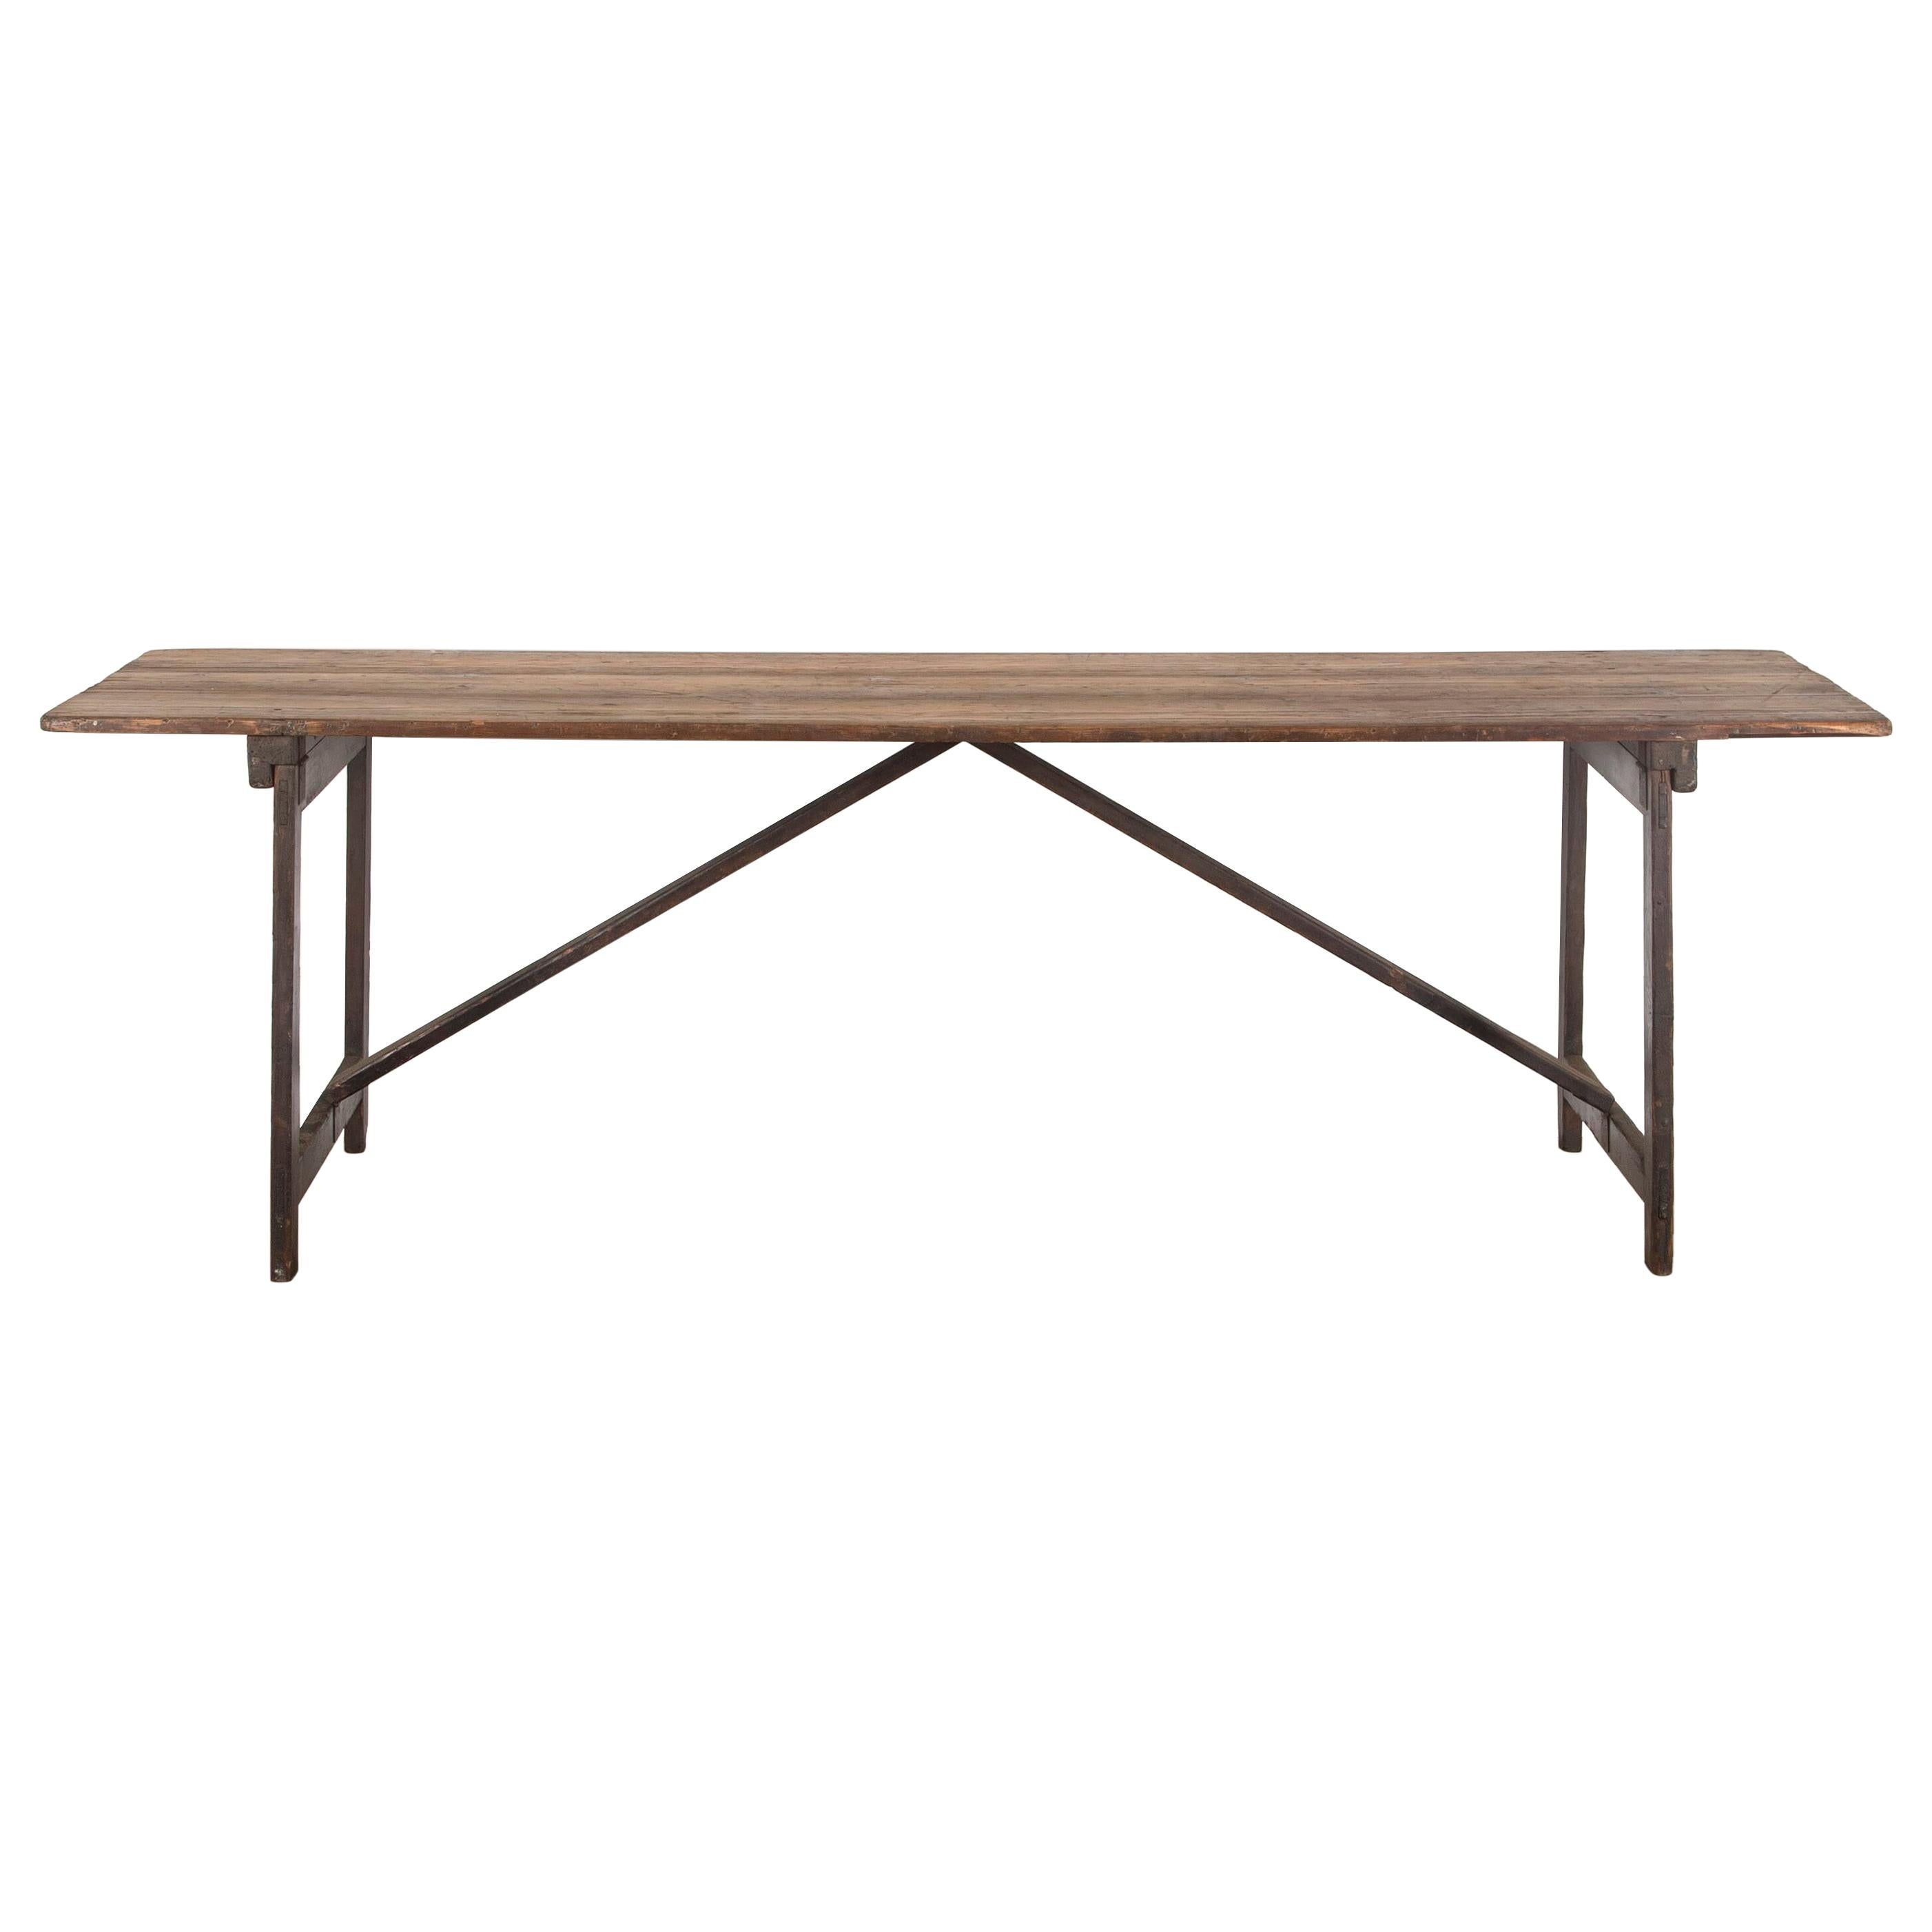 Large 19th Century English Trestle Table For Sale